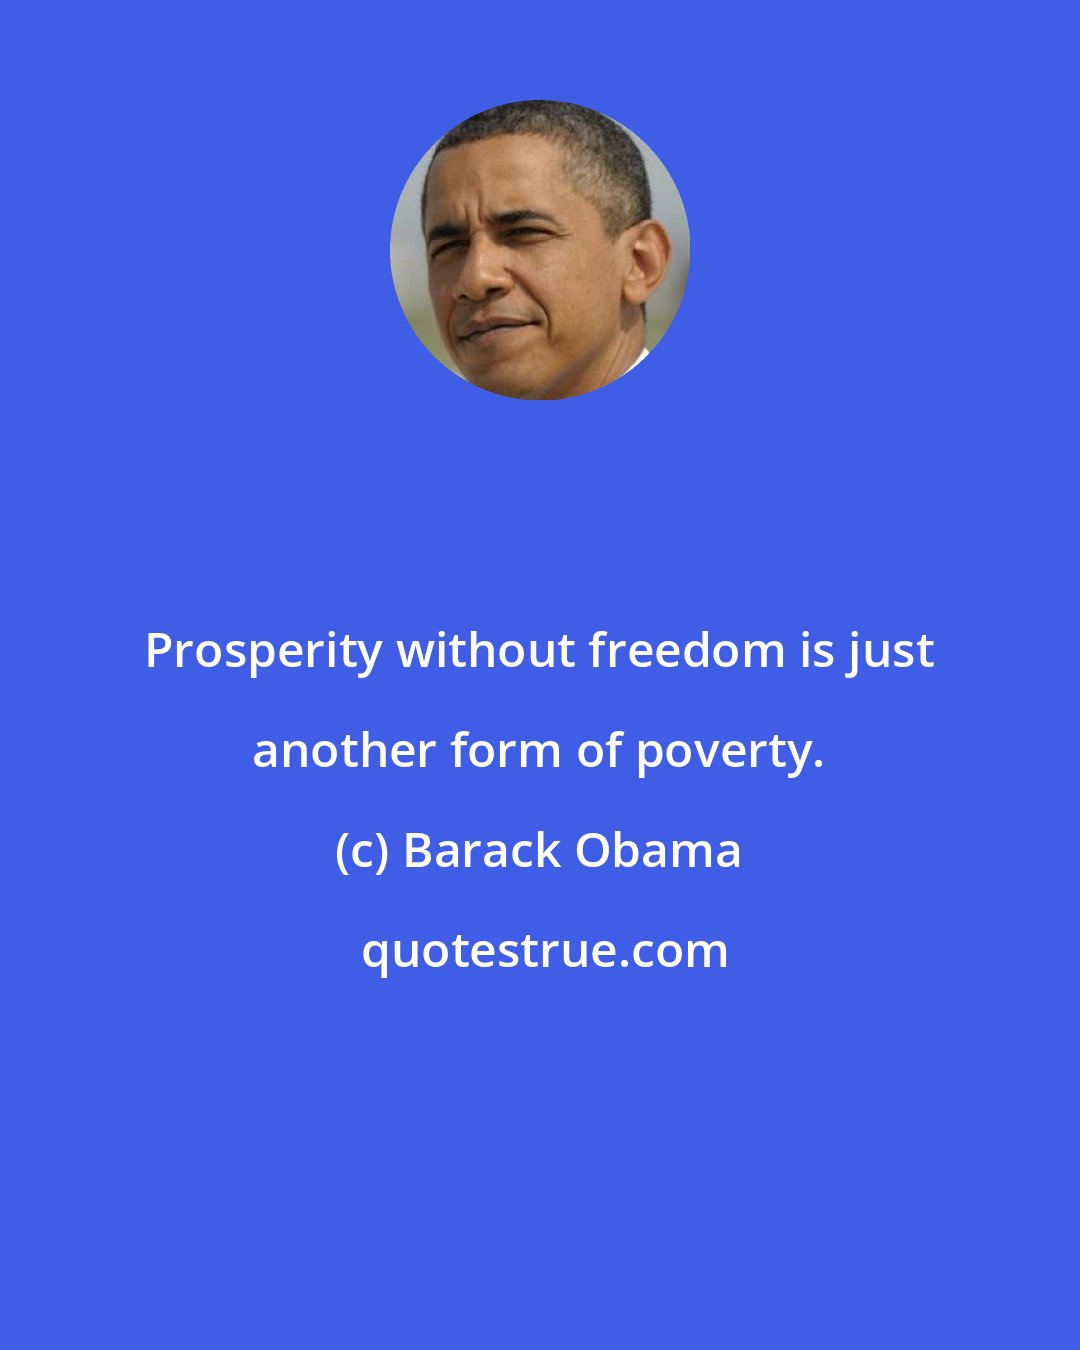 Barack Obama: Prosperity without freedom is just another form of poverty.